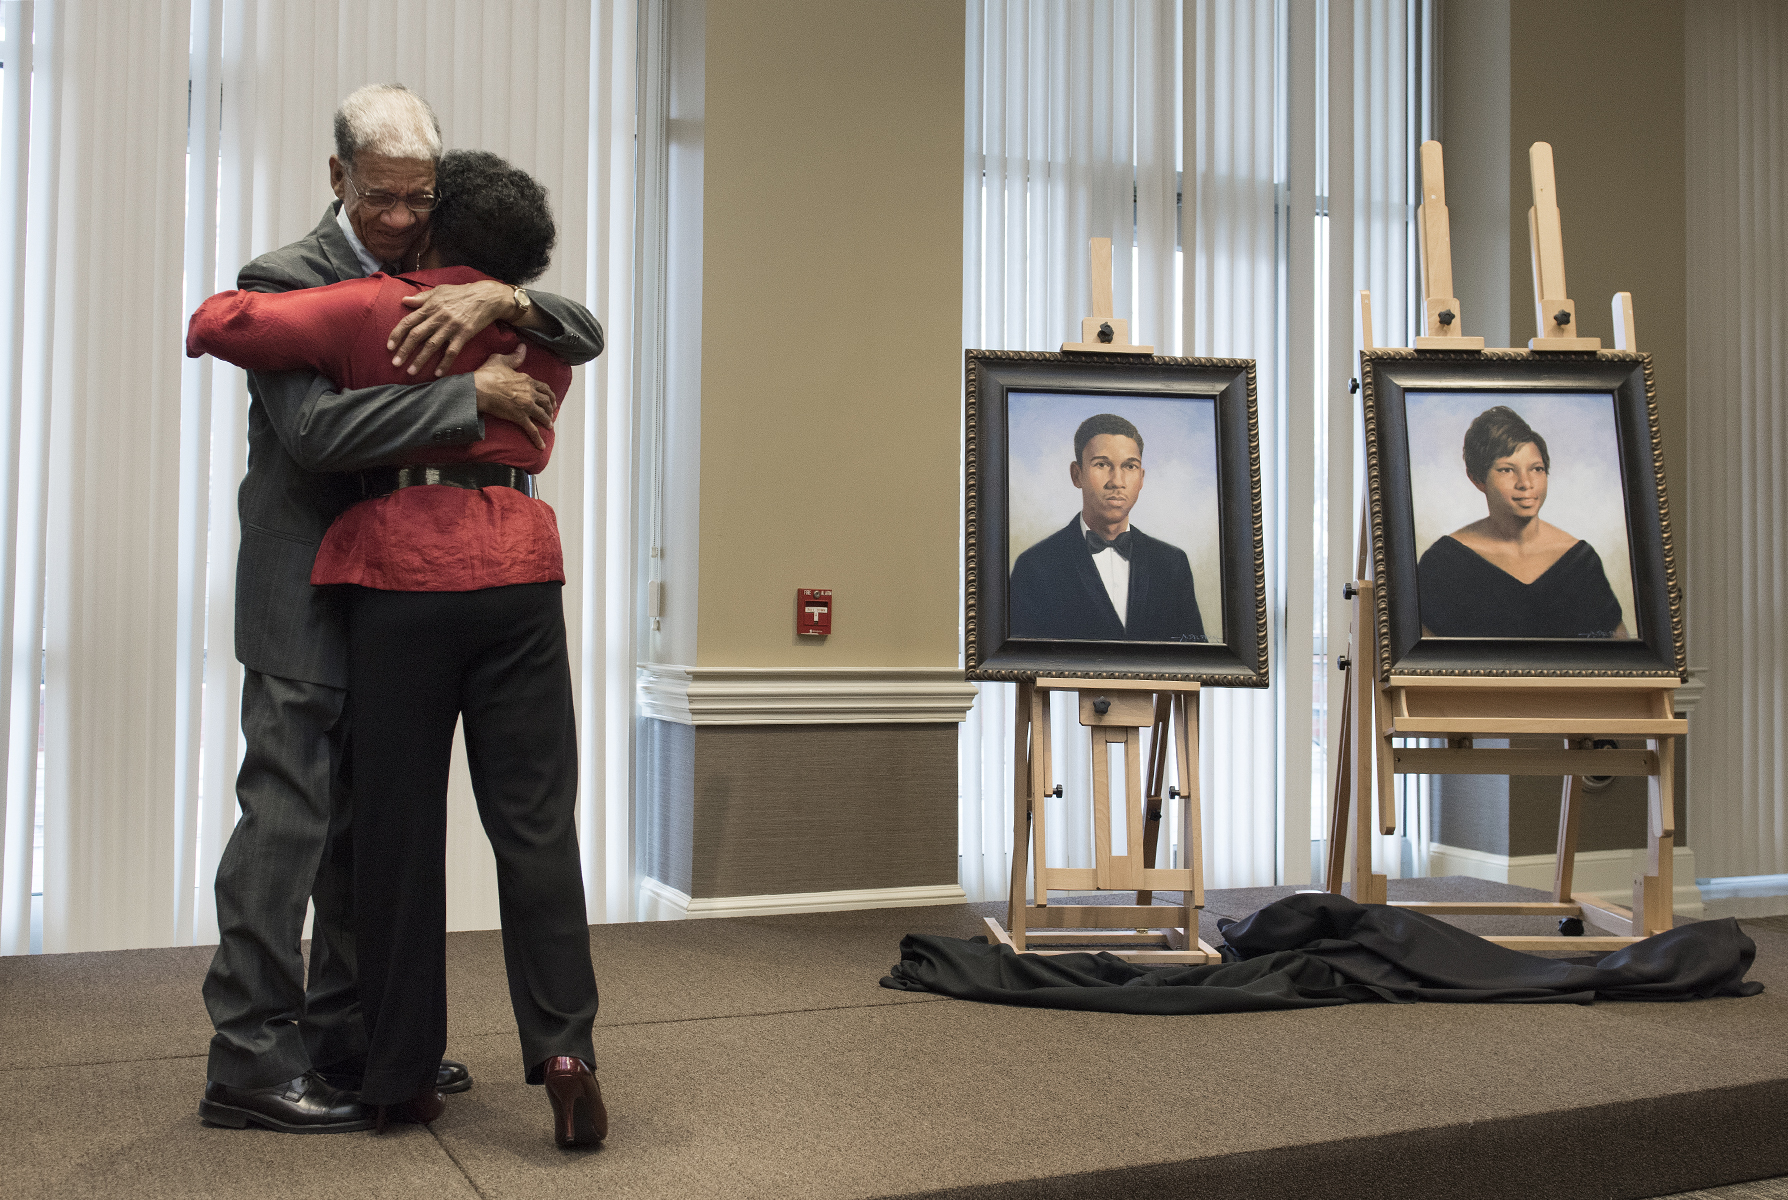 Glenda Phillips Hightower and Eugene Perry ‘69 are honored with formal portraits during a ceremony to commemorate their roles in Elon's history as the first black student and the first black graduate, respectively.